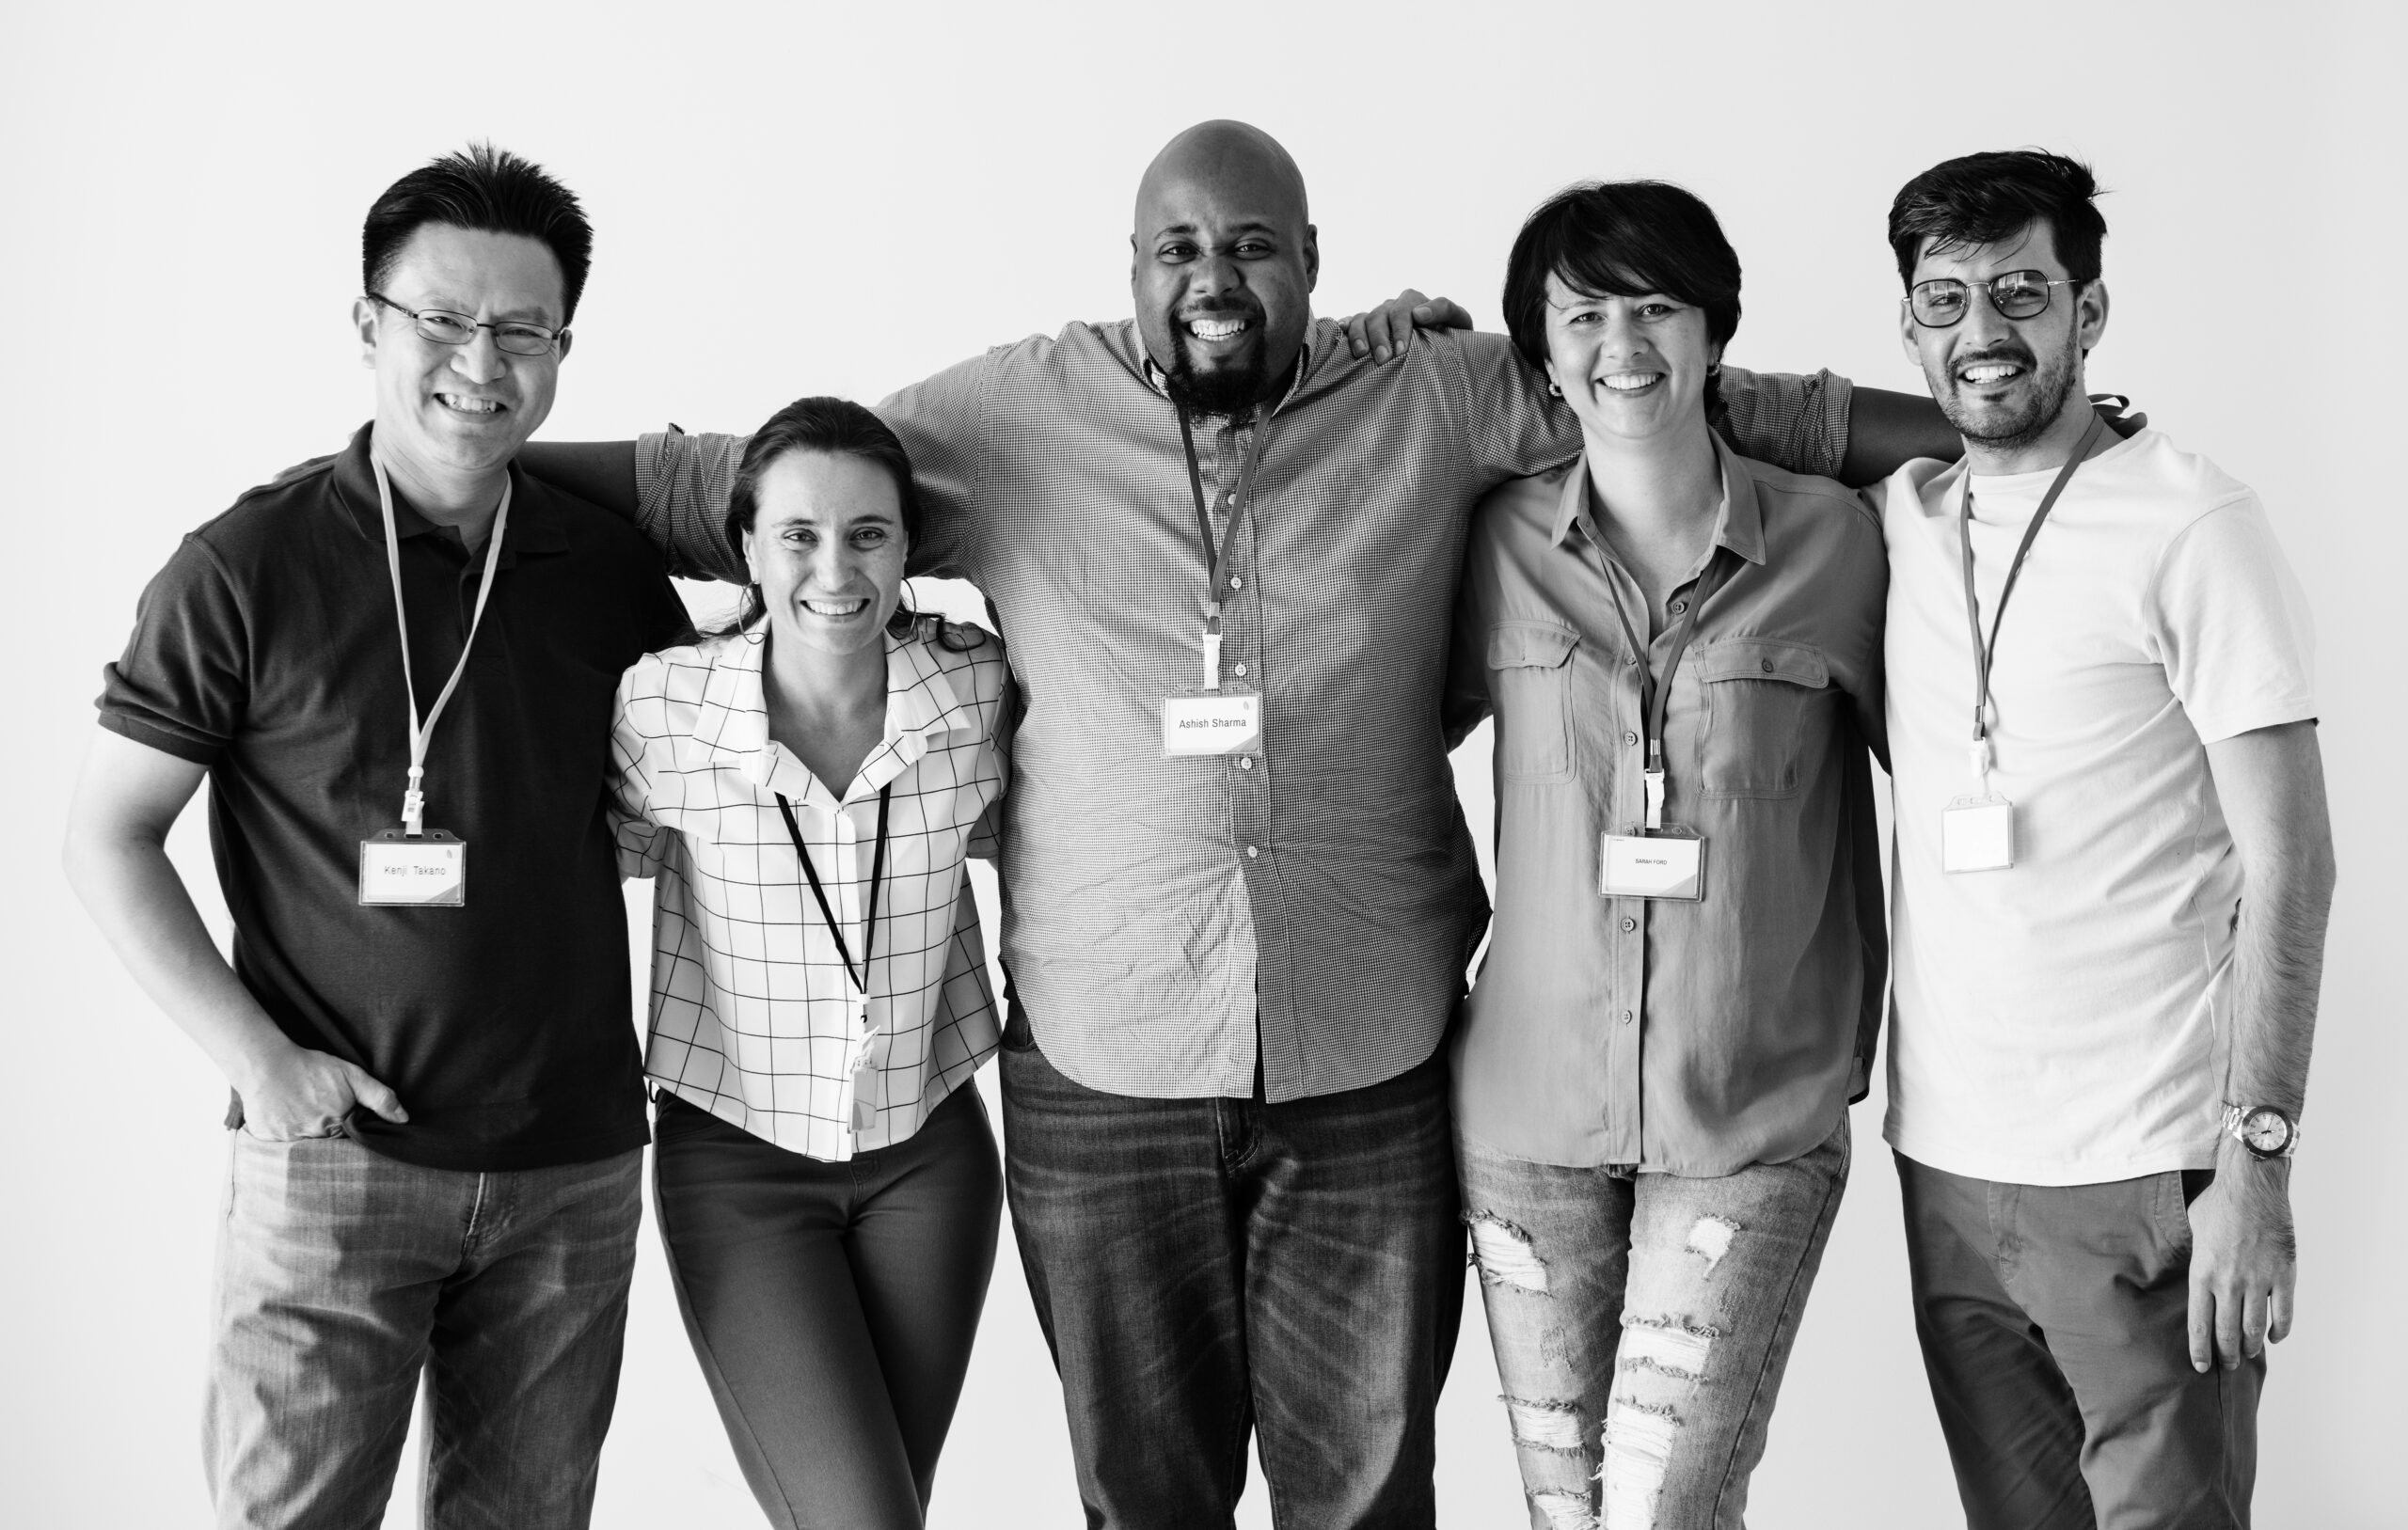 Black and white photo of a diverse group of men and women standing together wearing lanyards